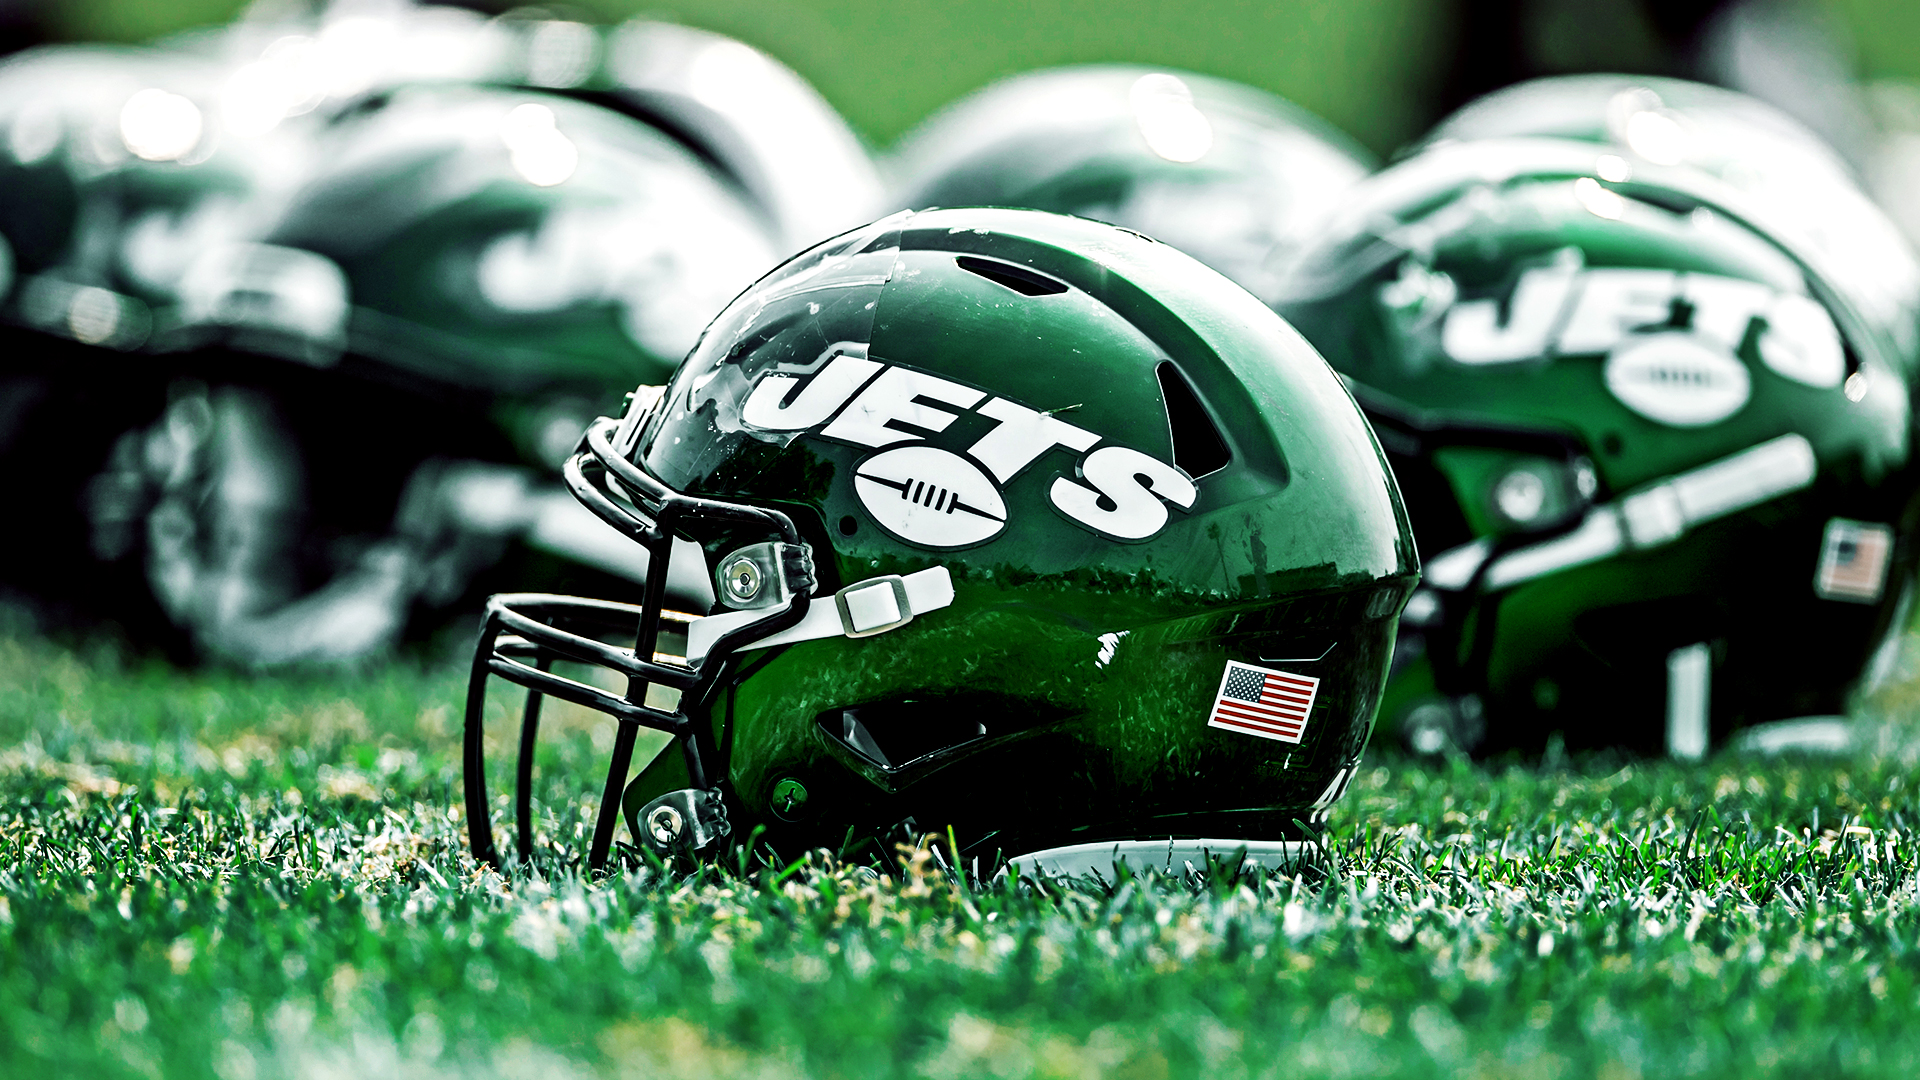 UPDATE: New York Jets Latest Injury Has Create More Change for Jets’ Offensive Line…